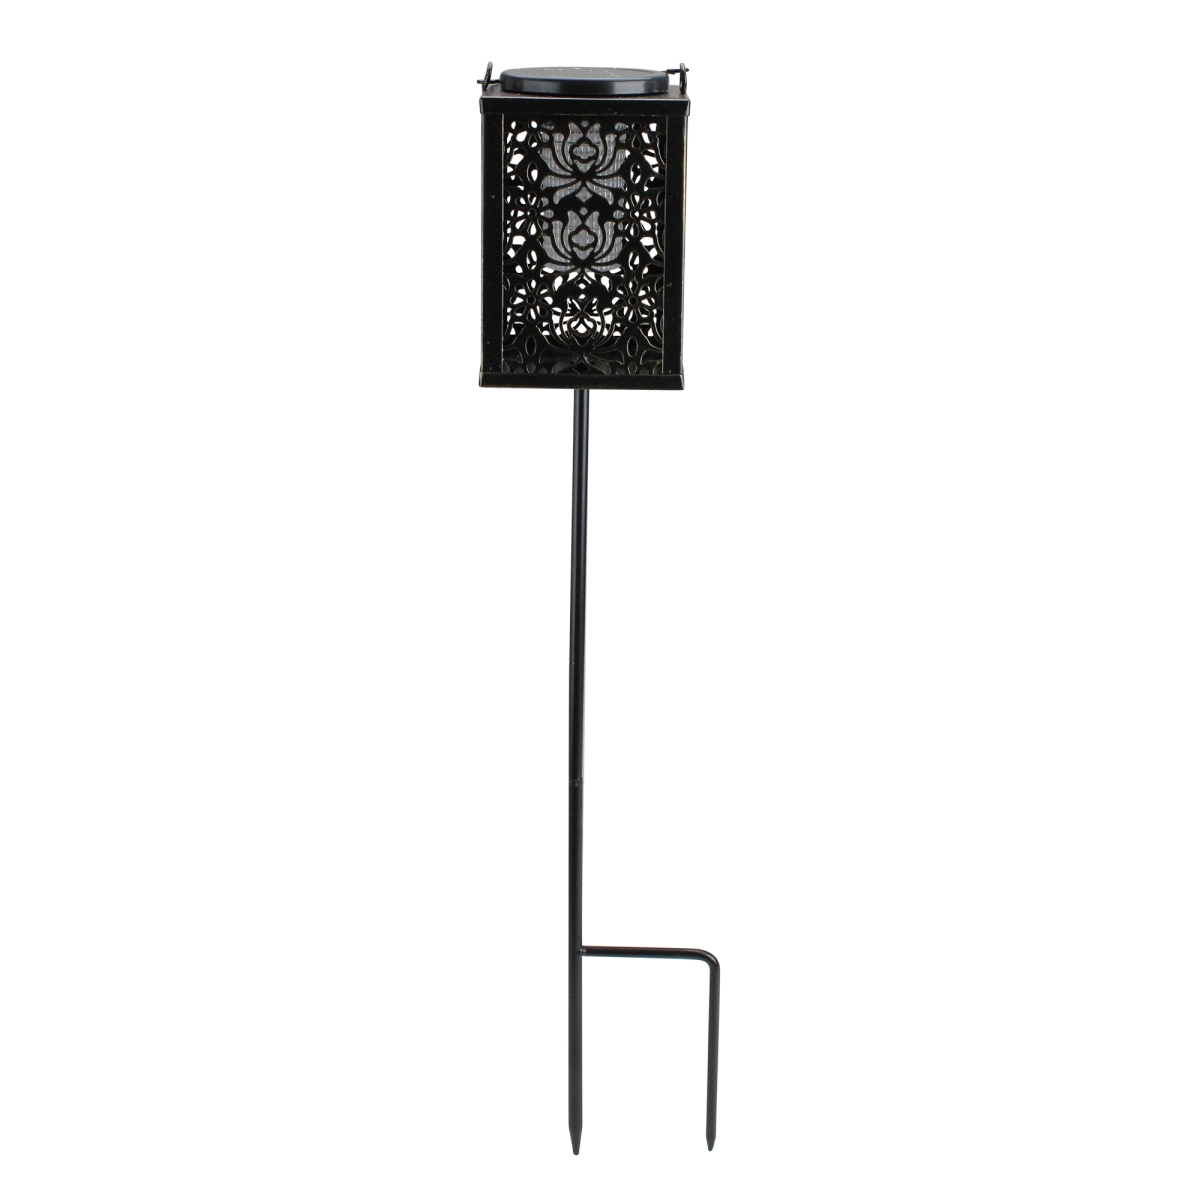 Picture of Avon 33537553 33 in. Solar Powered Antique Finish Lantern with Garden Stake